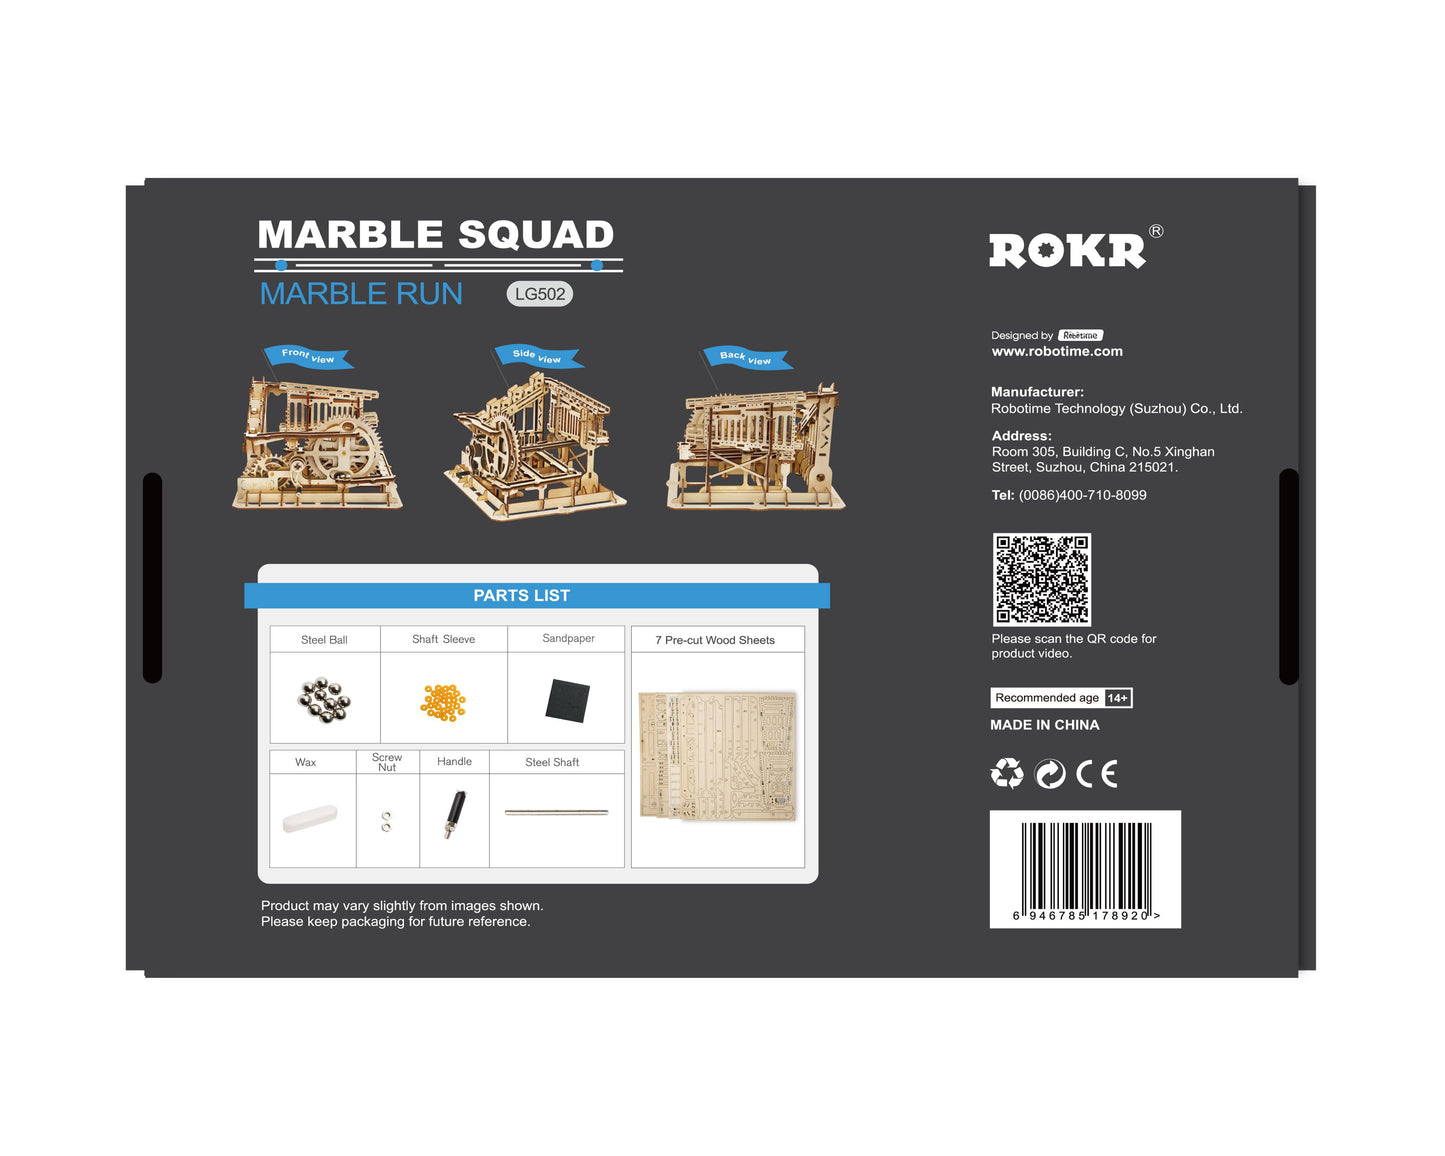 Rokr Marble Squad